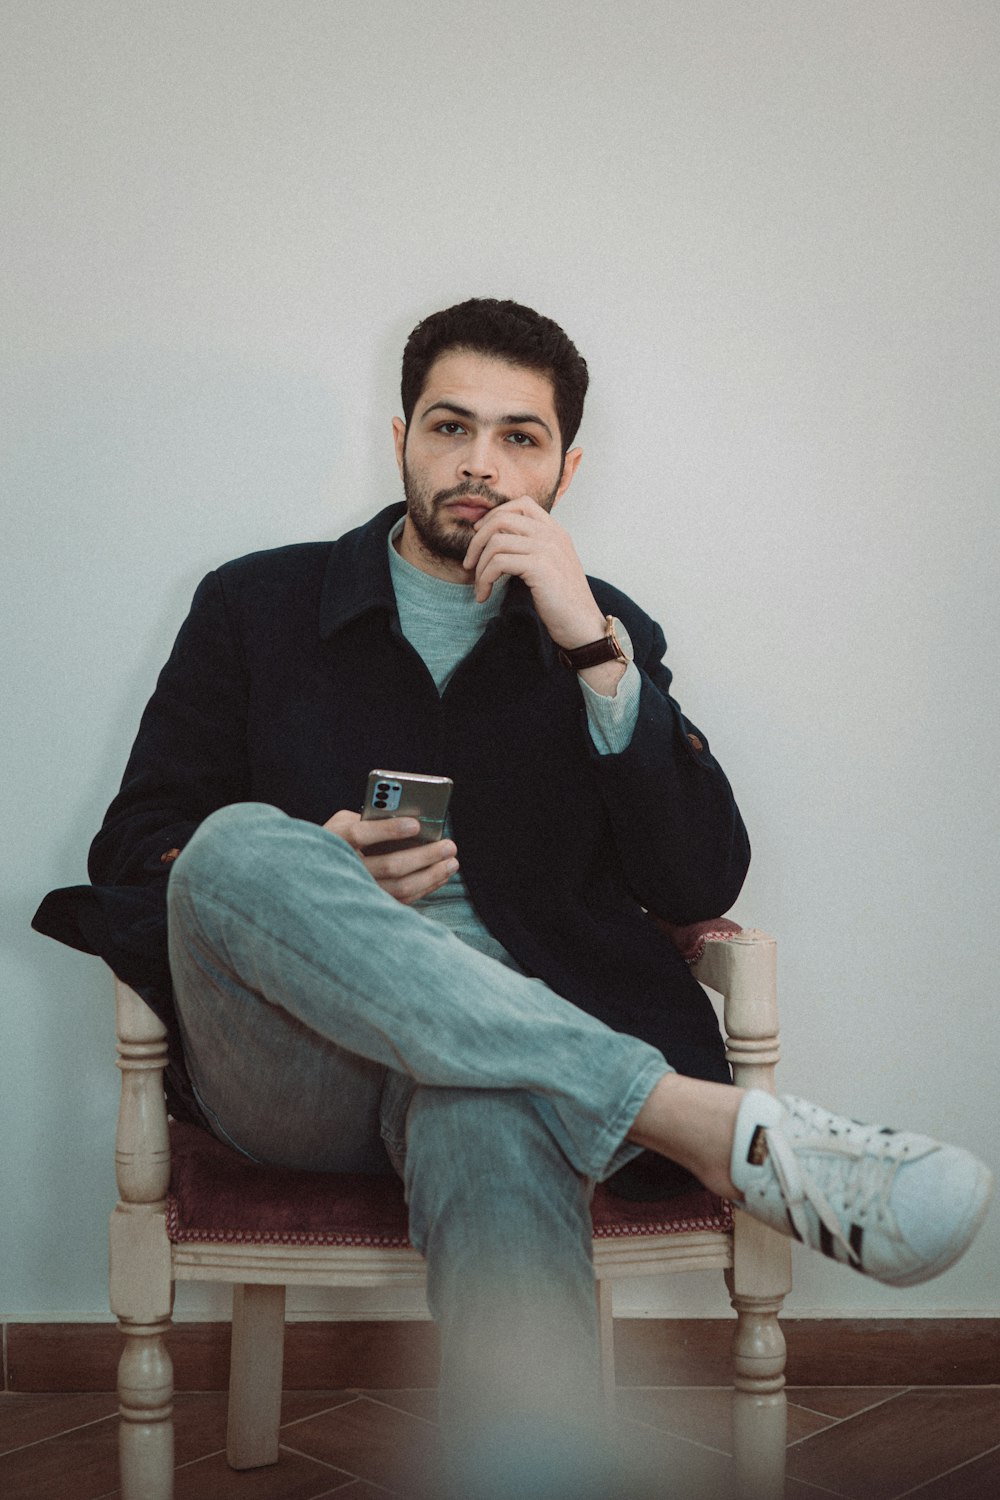 a man sitting on a chair holding a cell phone